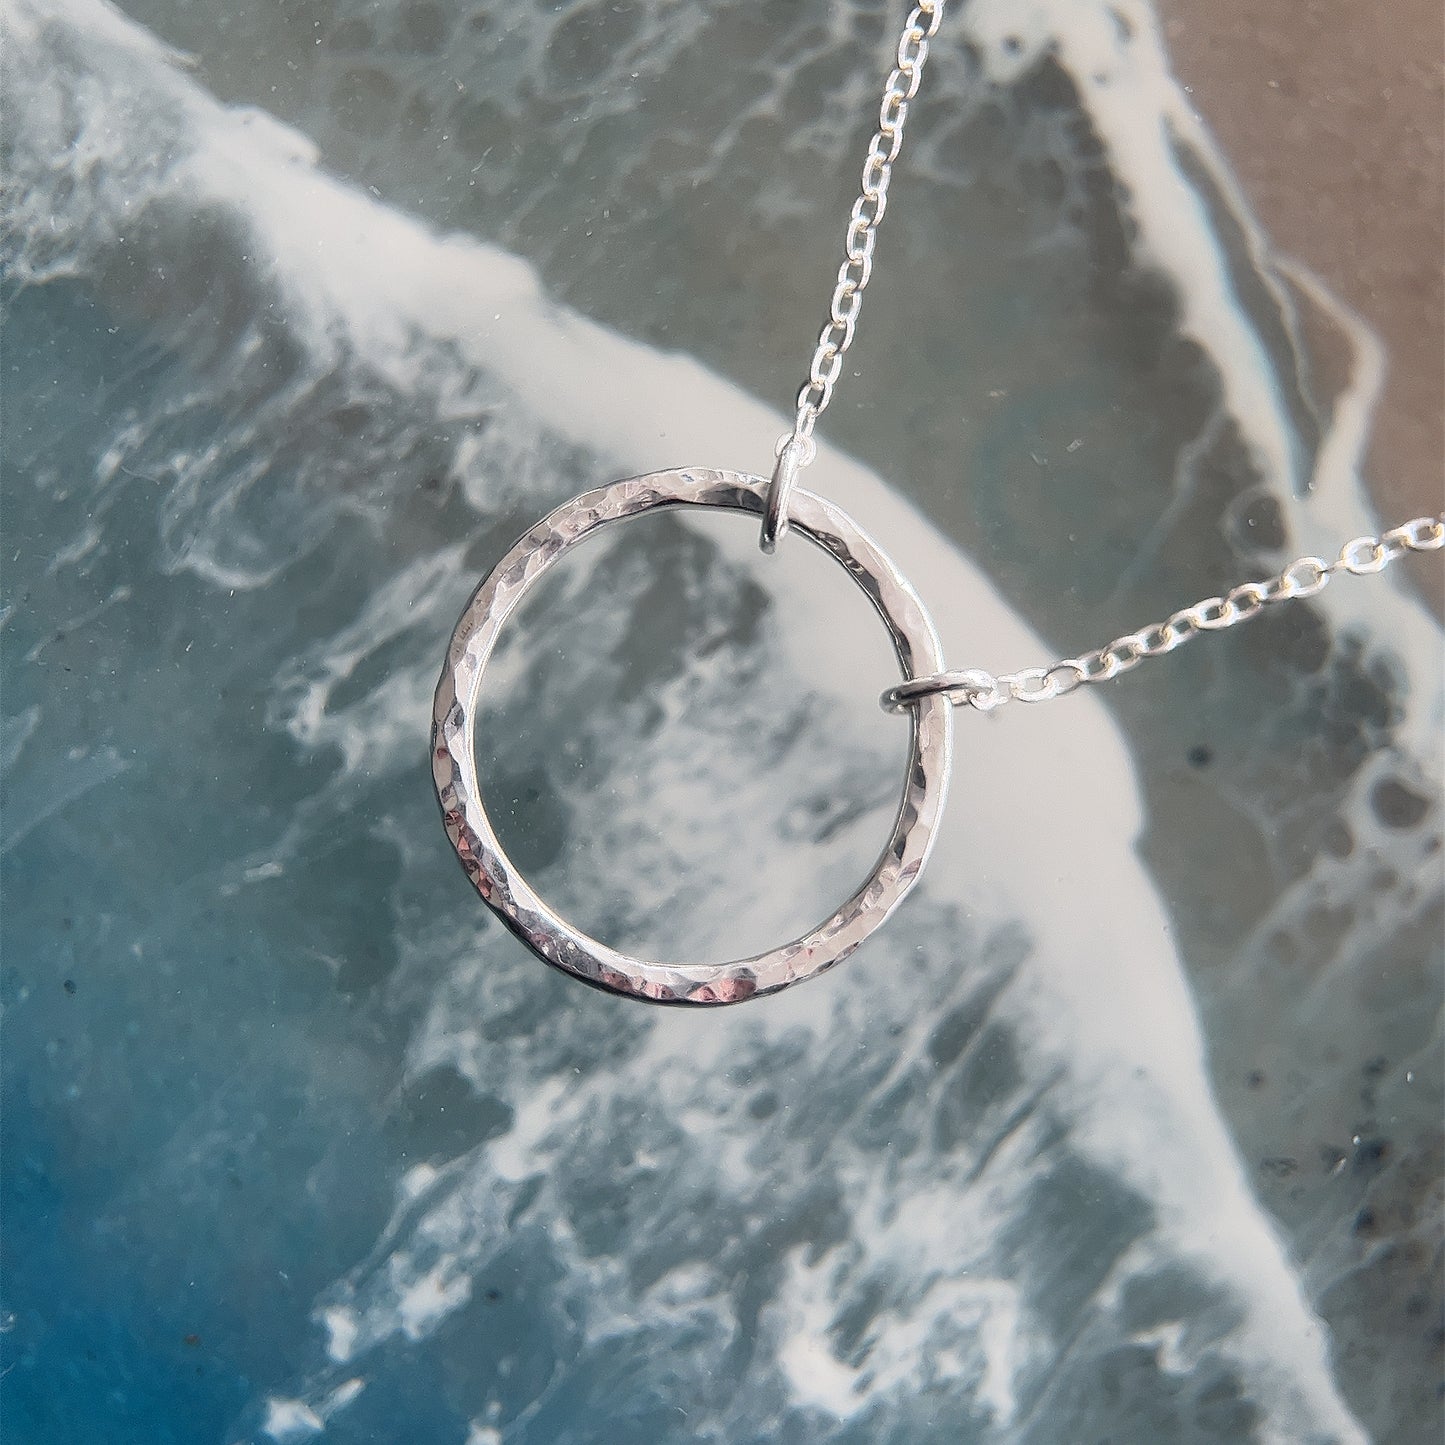 Perfect Circle Necklace